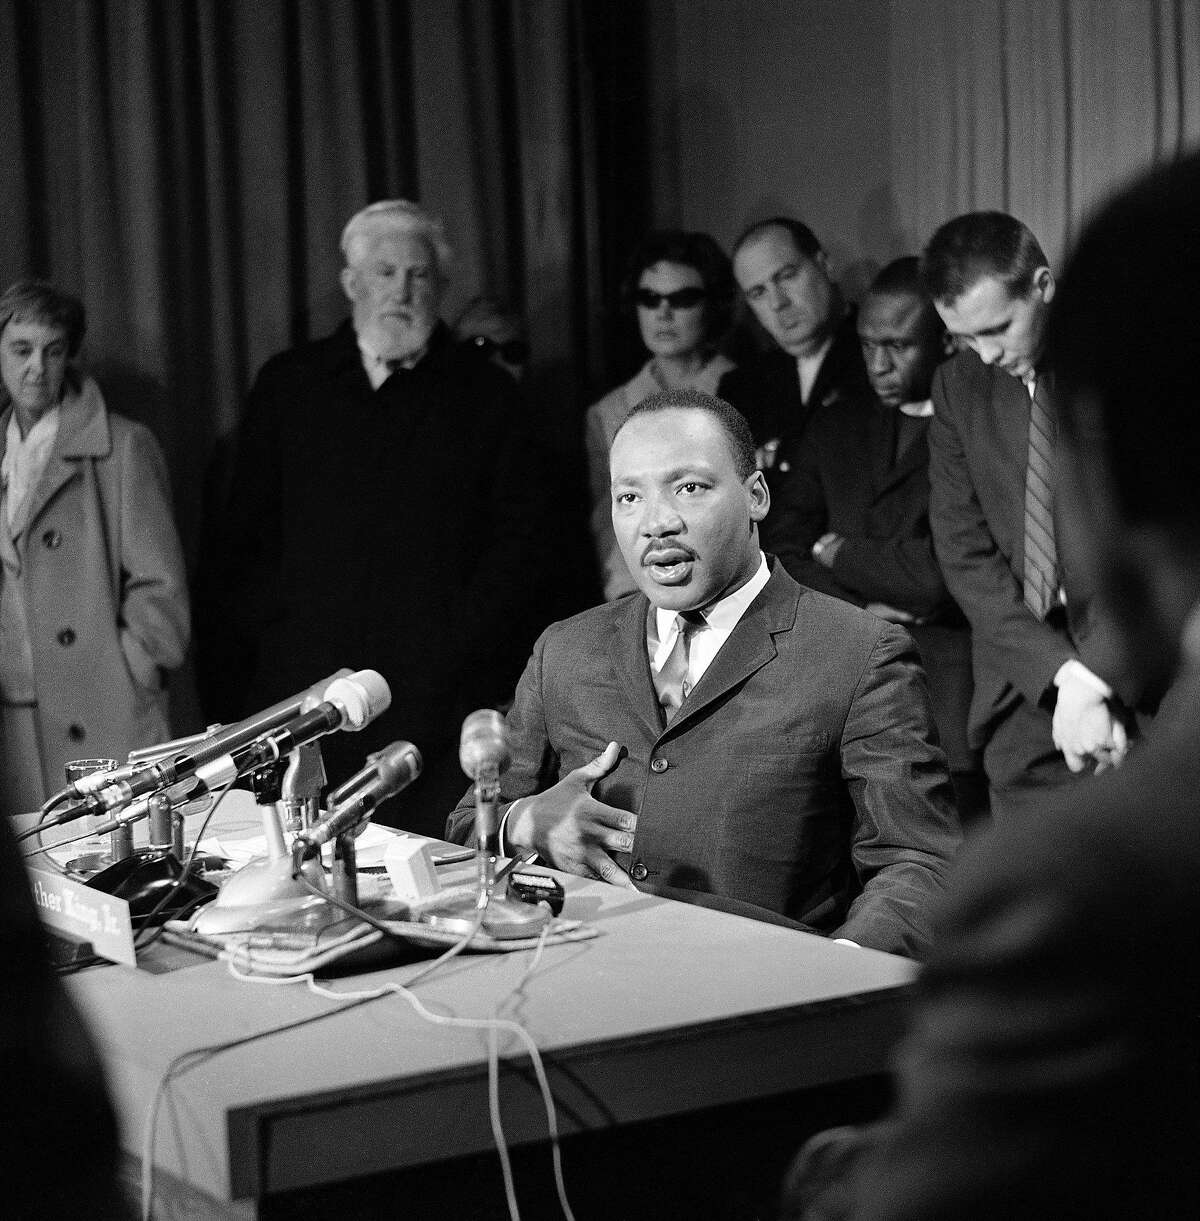 Dr. Martin Luther King speaks from San Francisco on March 28, 1965 on a television program originating in Washington (�Meet the Press�) and announced him intention of asking an economic boycott on goods made in Alabama. King spoke to an overflow crowd in Grace Cathedral atop Nob Hill in San Francisco. (AP Photo)